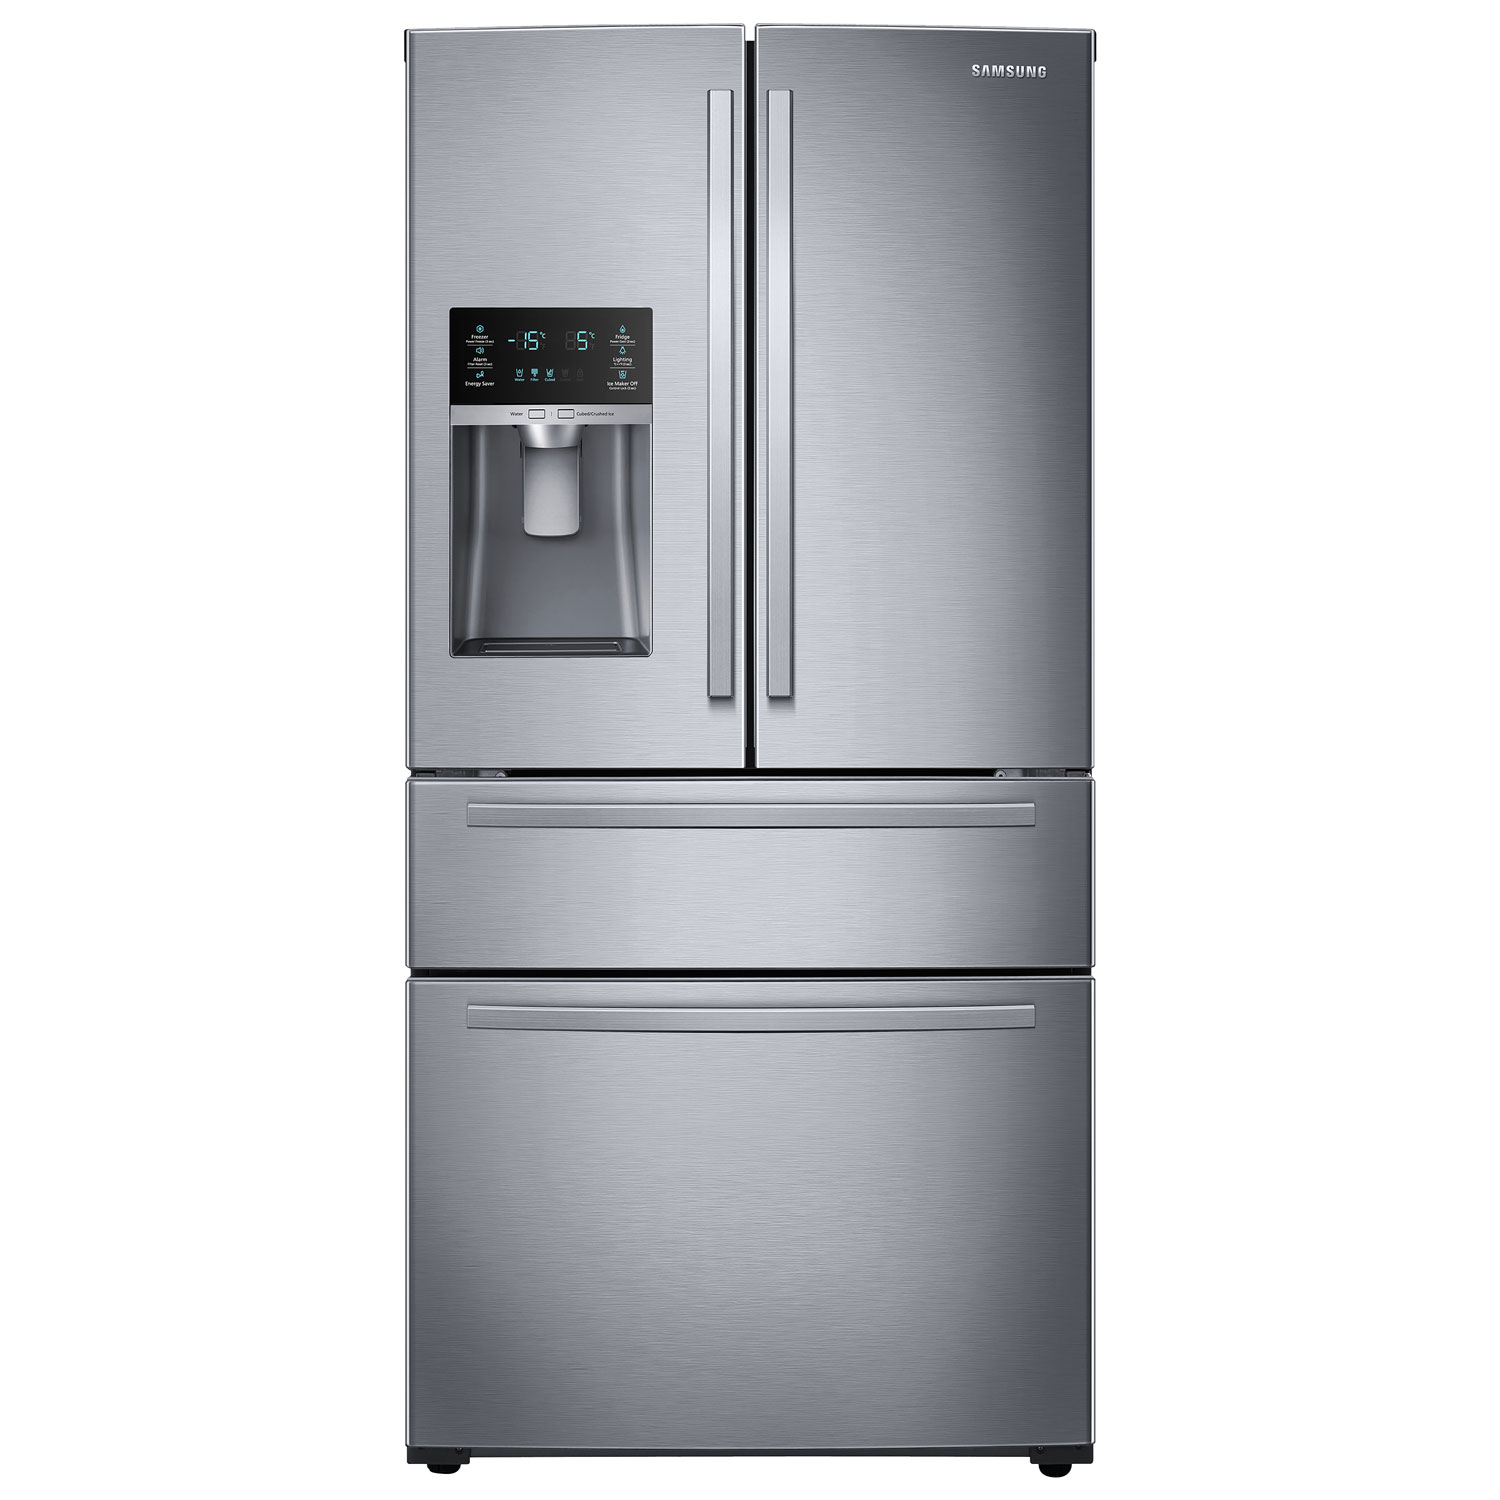 Samsung 33" 24.7 Cu. Ft. French Door Refrigerator with Water Dispenser (RF25HMIDBSR) - Stainless